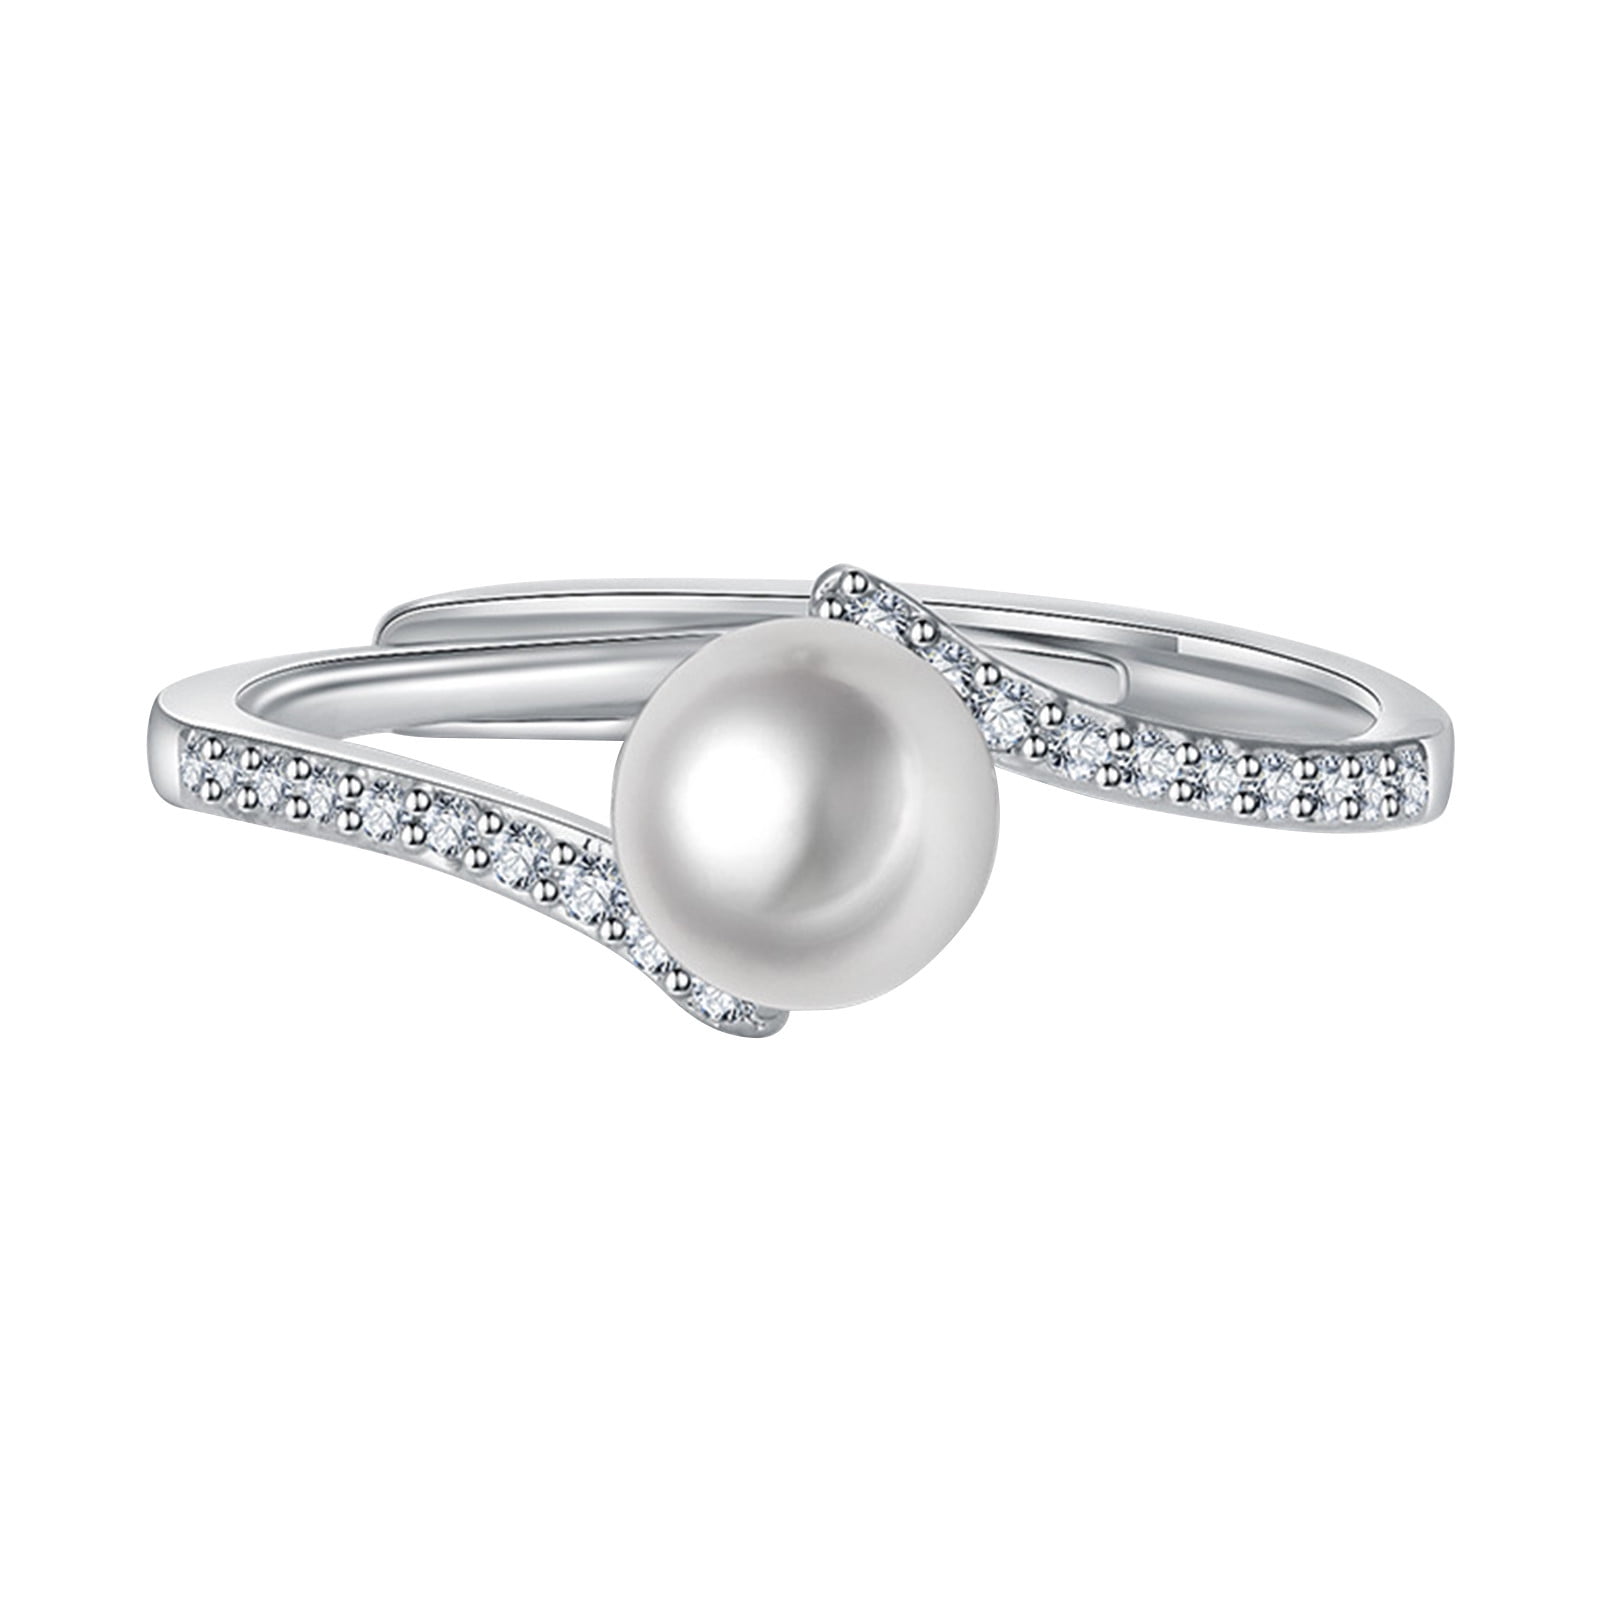 Shop For Best Women Pearl Rings From Widest Range Online